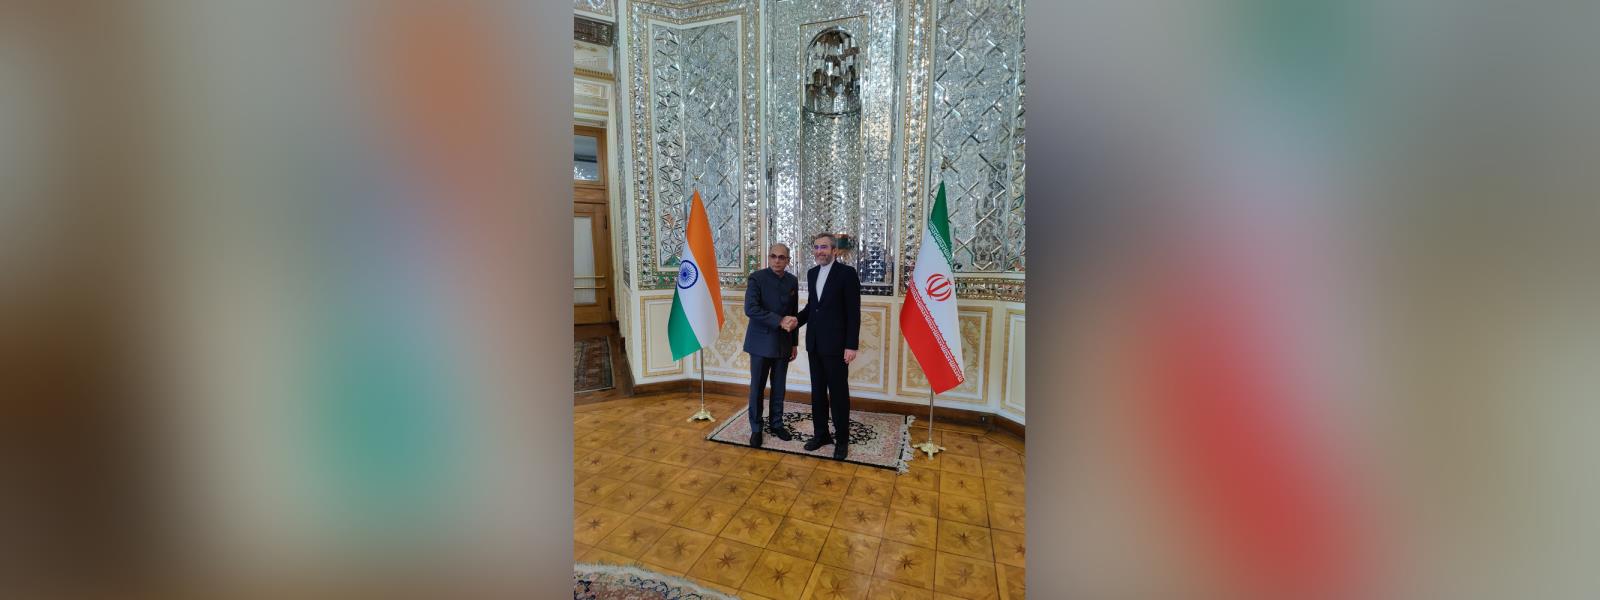 18th Foreign Office Consultations between India-Iran held in Tehran, co-chaired by Foreign Secretary Shri Vinay Kwatra and H.E. Mr. Bagheri Kani, Deputy Foreign Minister for Political Affairs of Iran